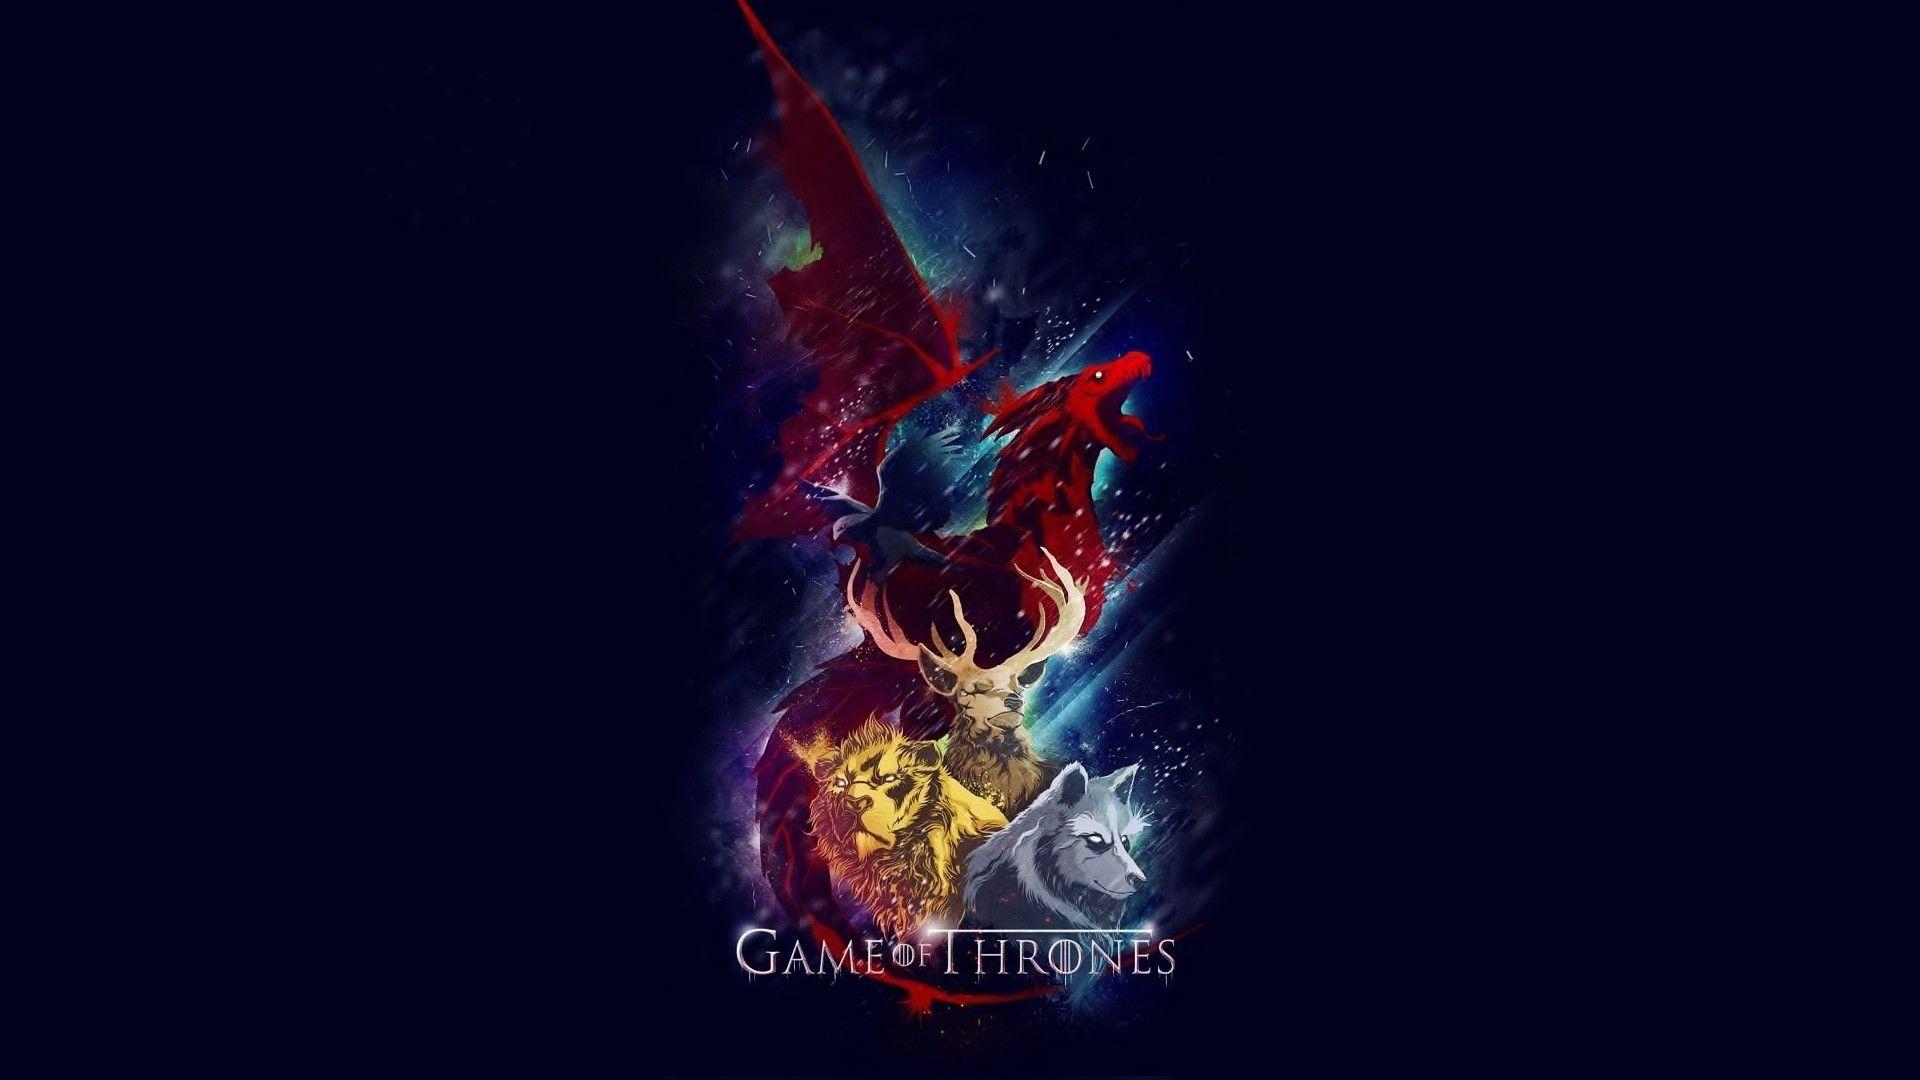 Game of Thrones wallpaper 1920x1080Download free cool HD